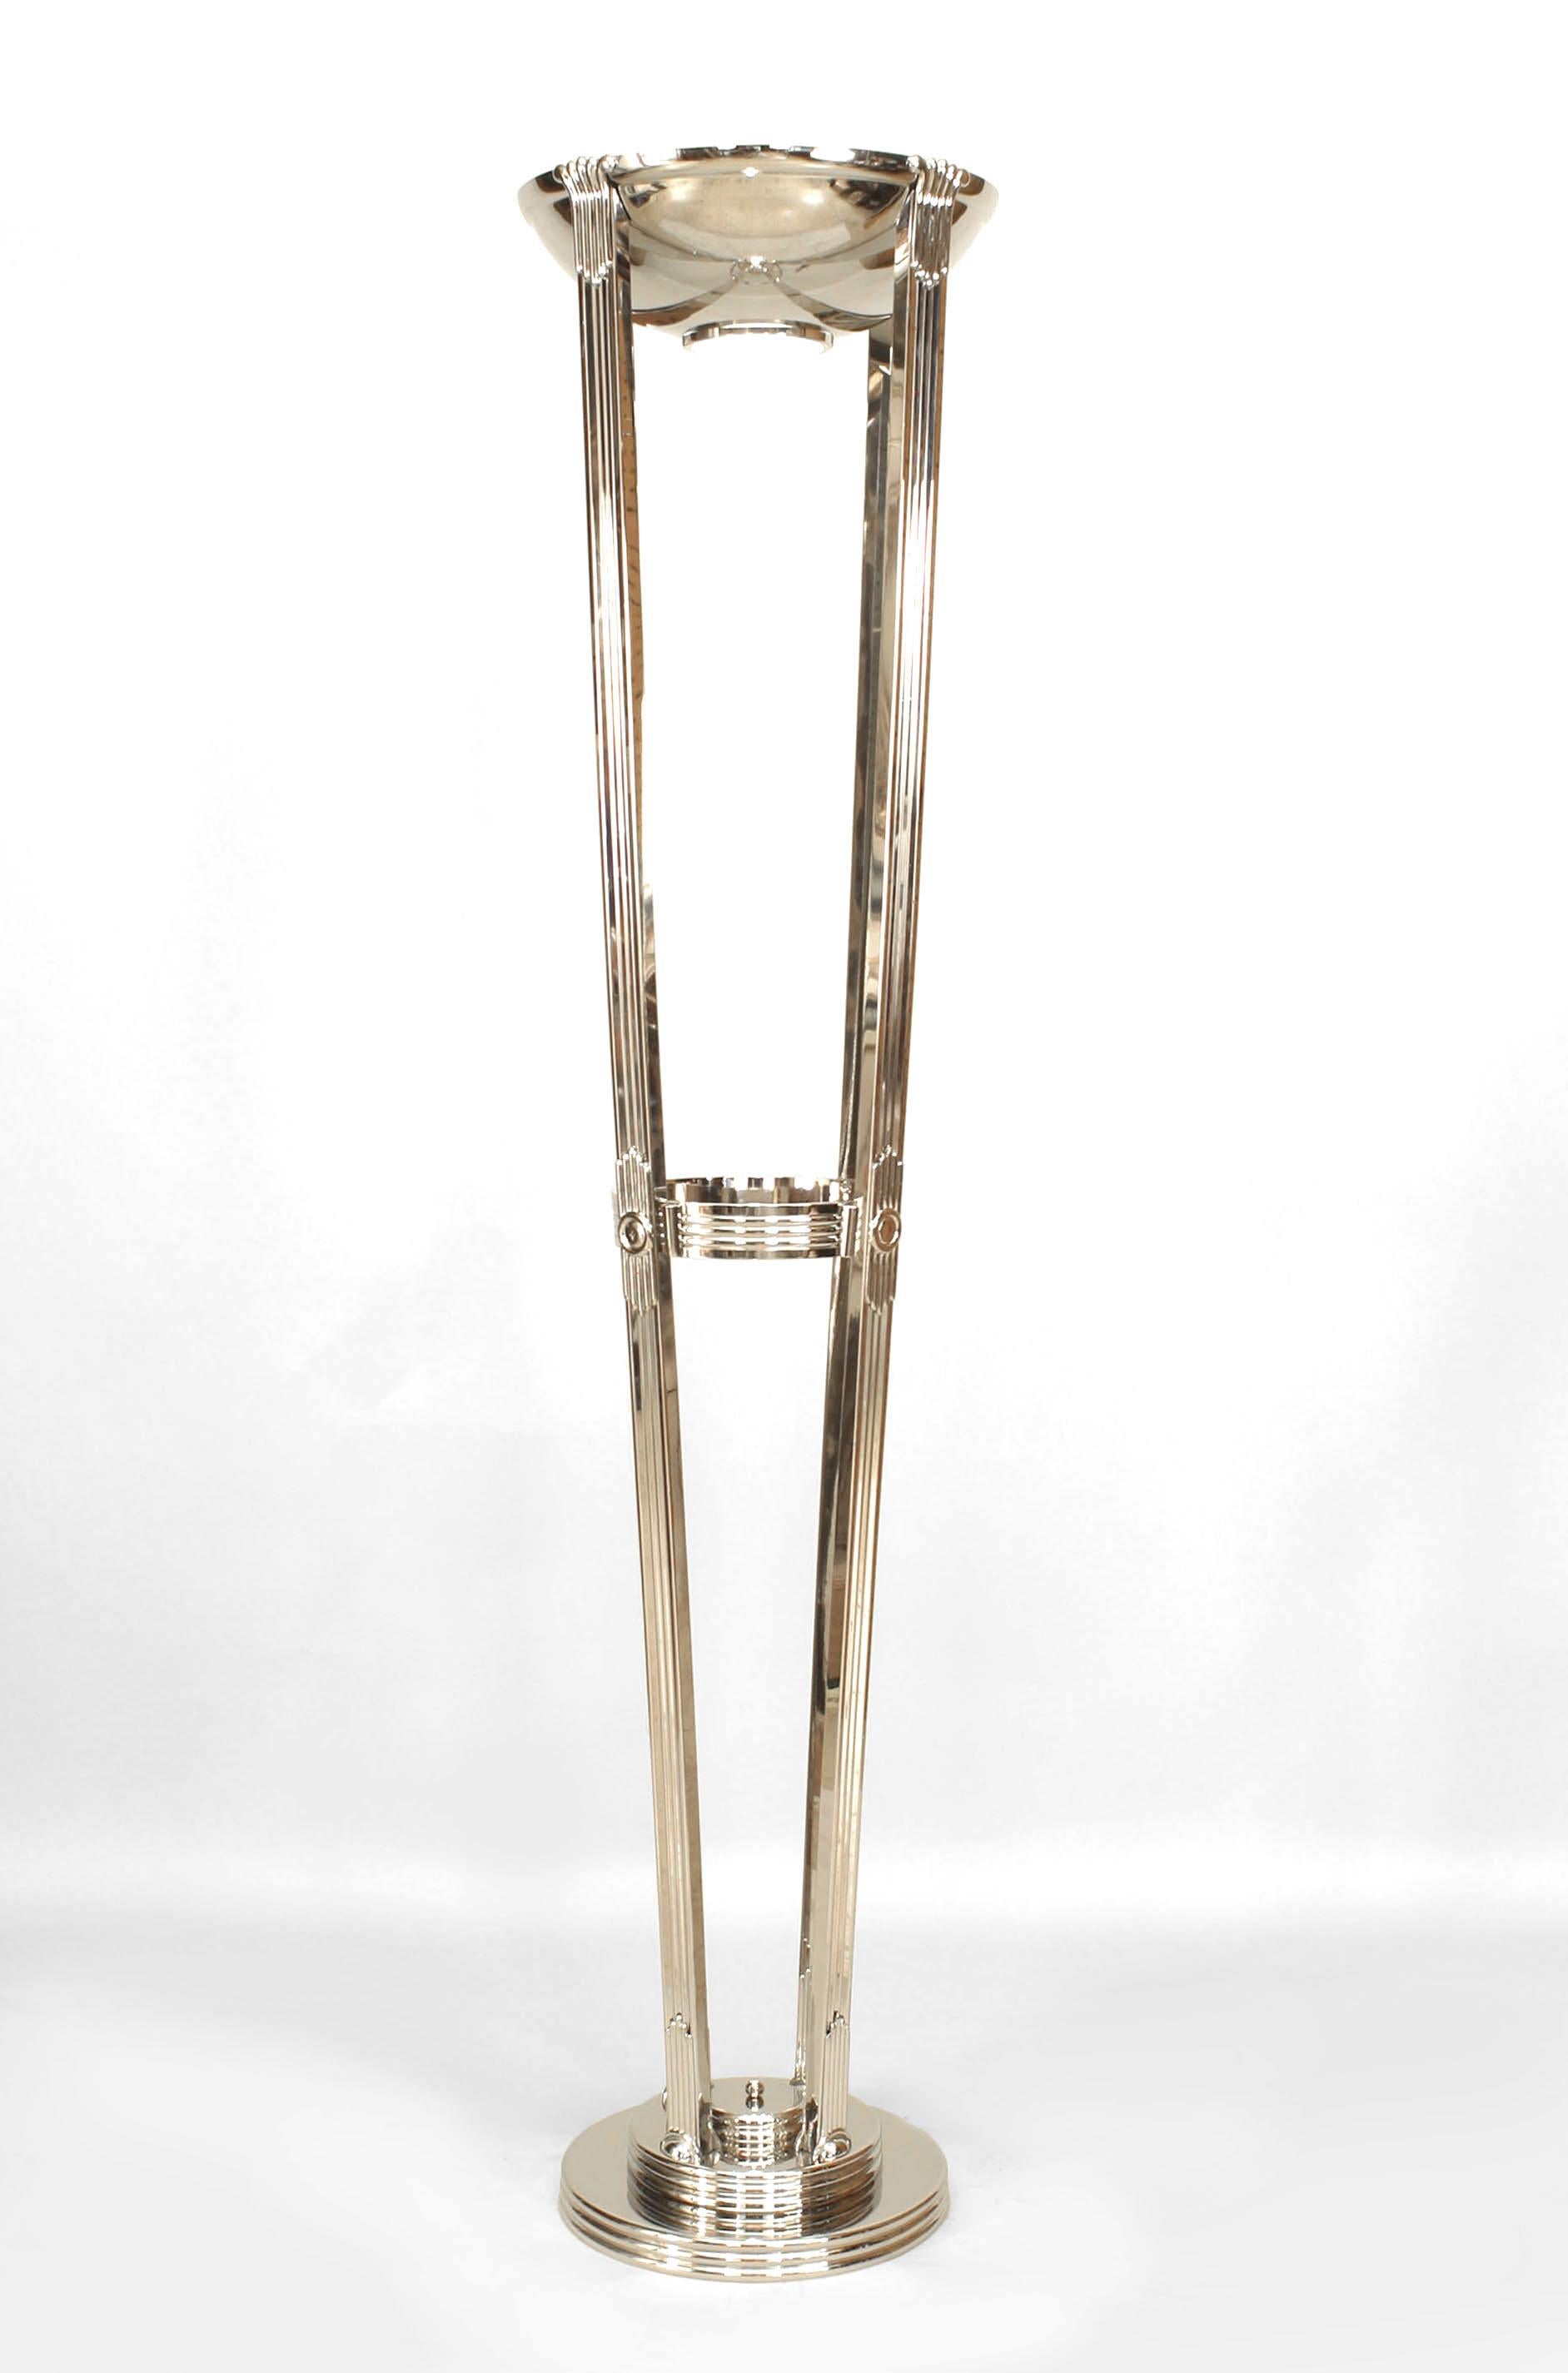 2 Pairs of French Art Deco Style Chrome Floor Lamps In Good Condition For Sale In New York, NY